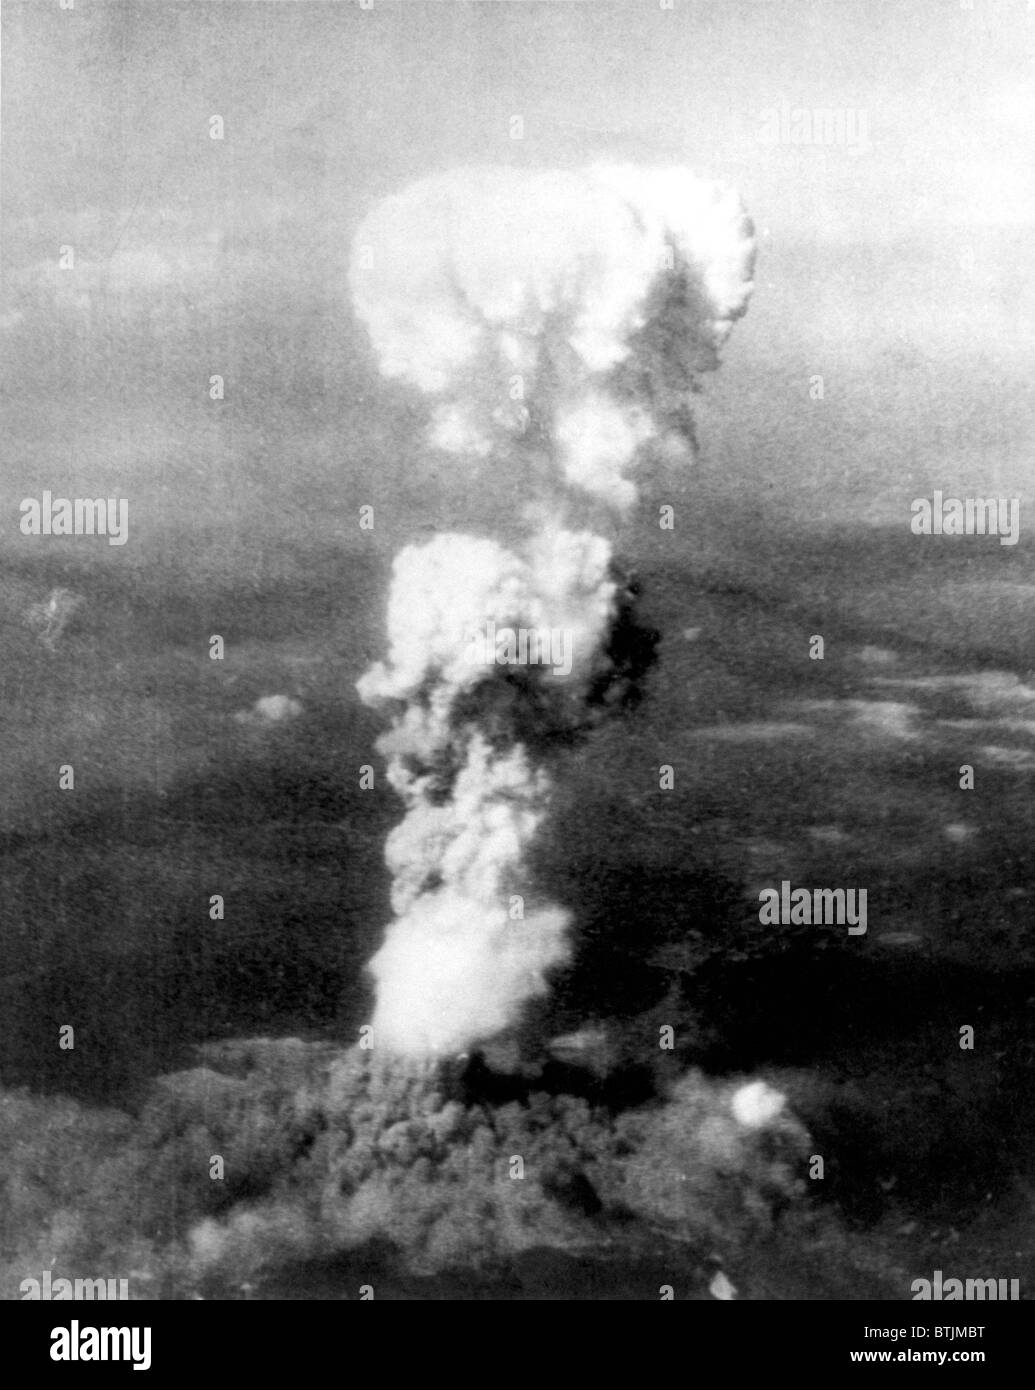 Atomic bomb. A mushroom cloud rises more than 20,000 feet into the air over Hiroshima, Japan after an atomic bomb was dropped by the US bomber 'Enola Gay', Aug. 5, 1945 Stock Photo